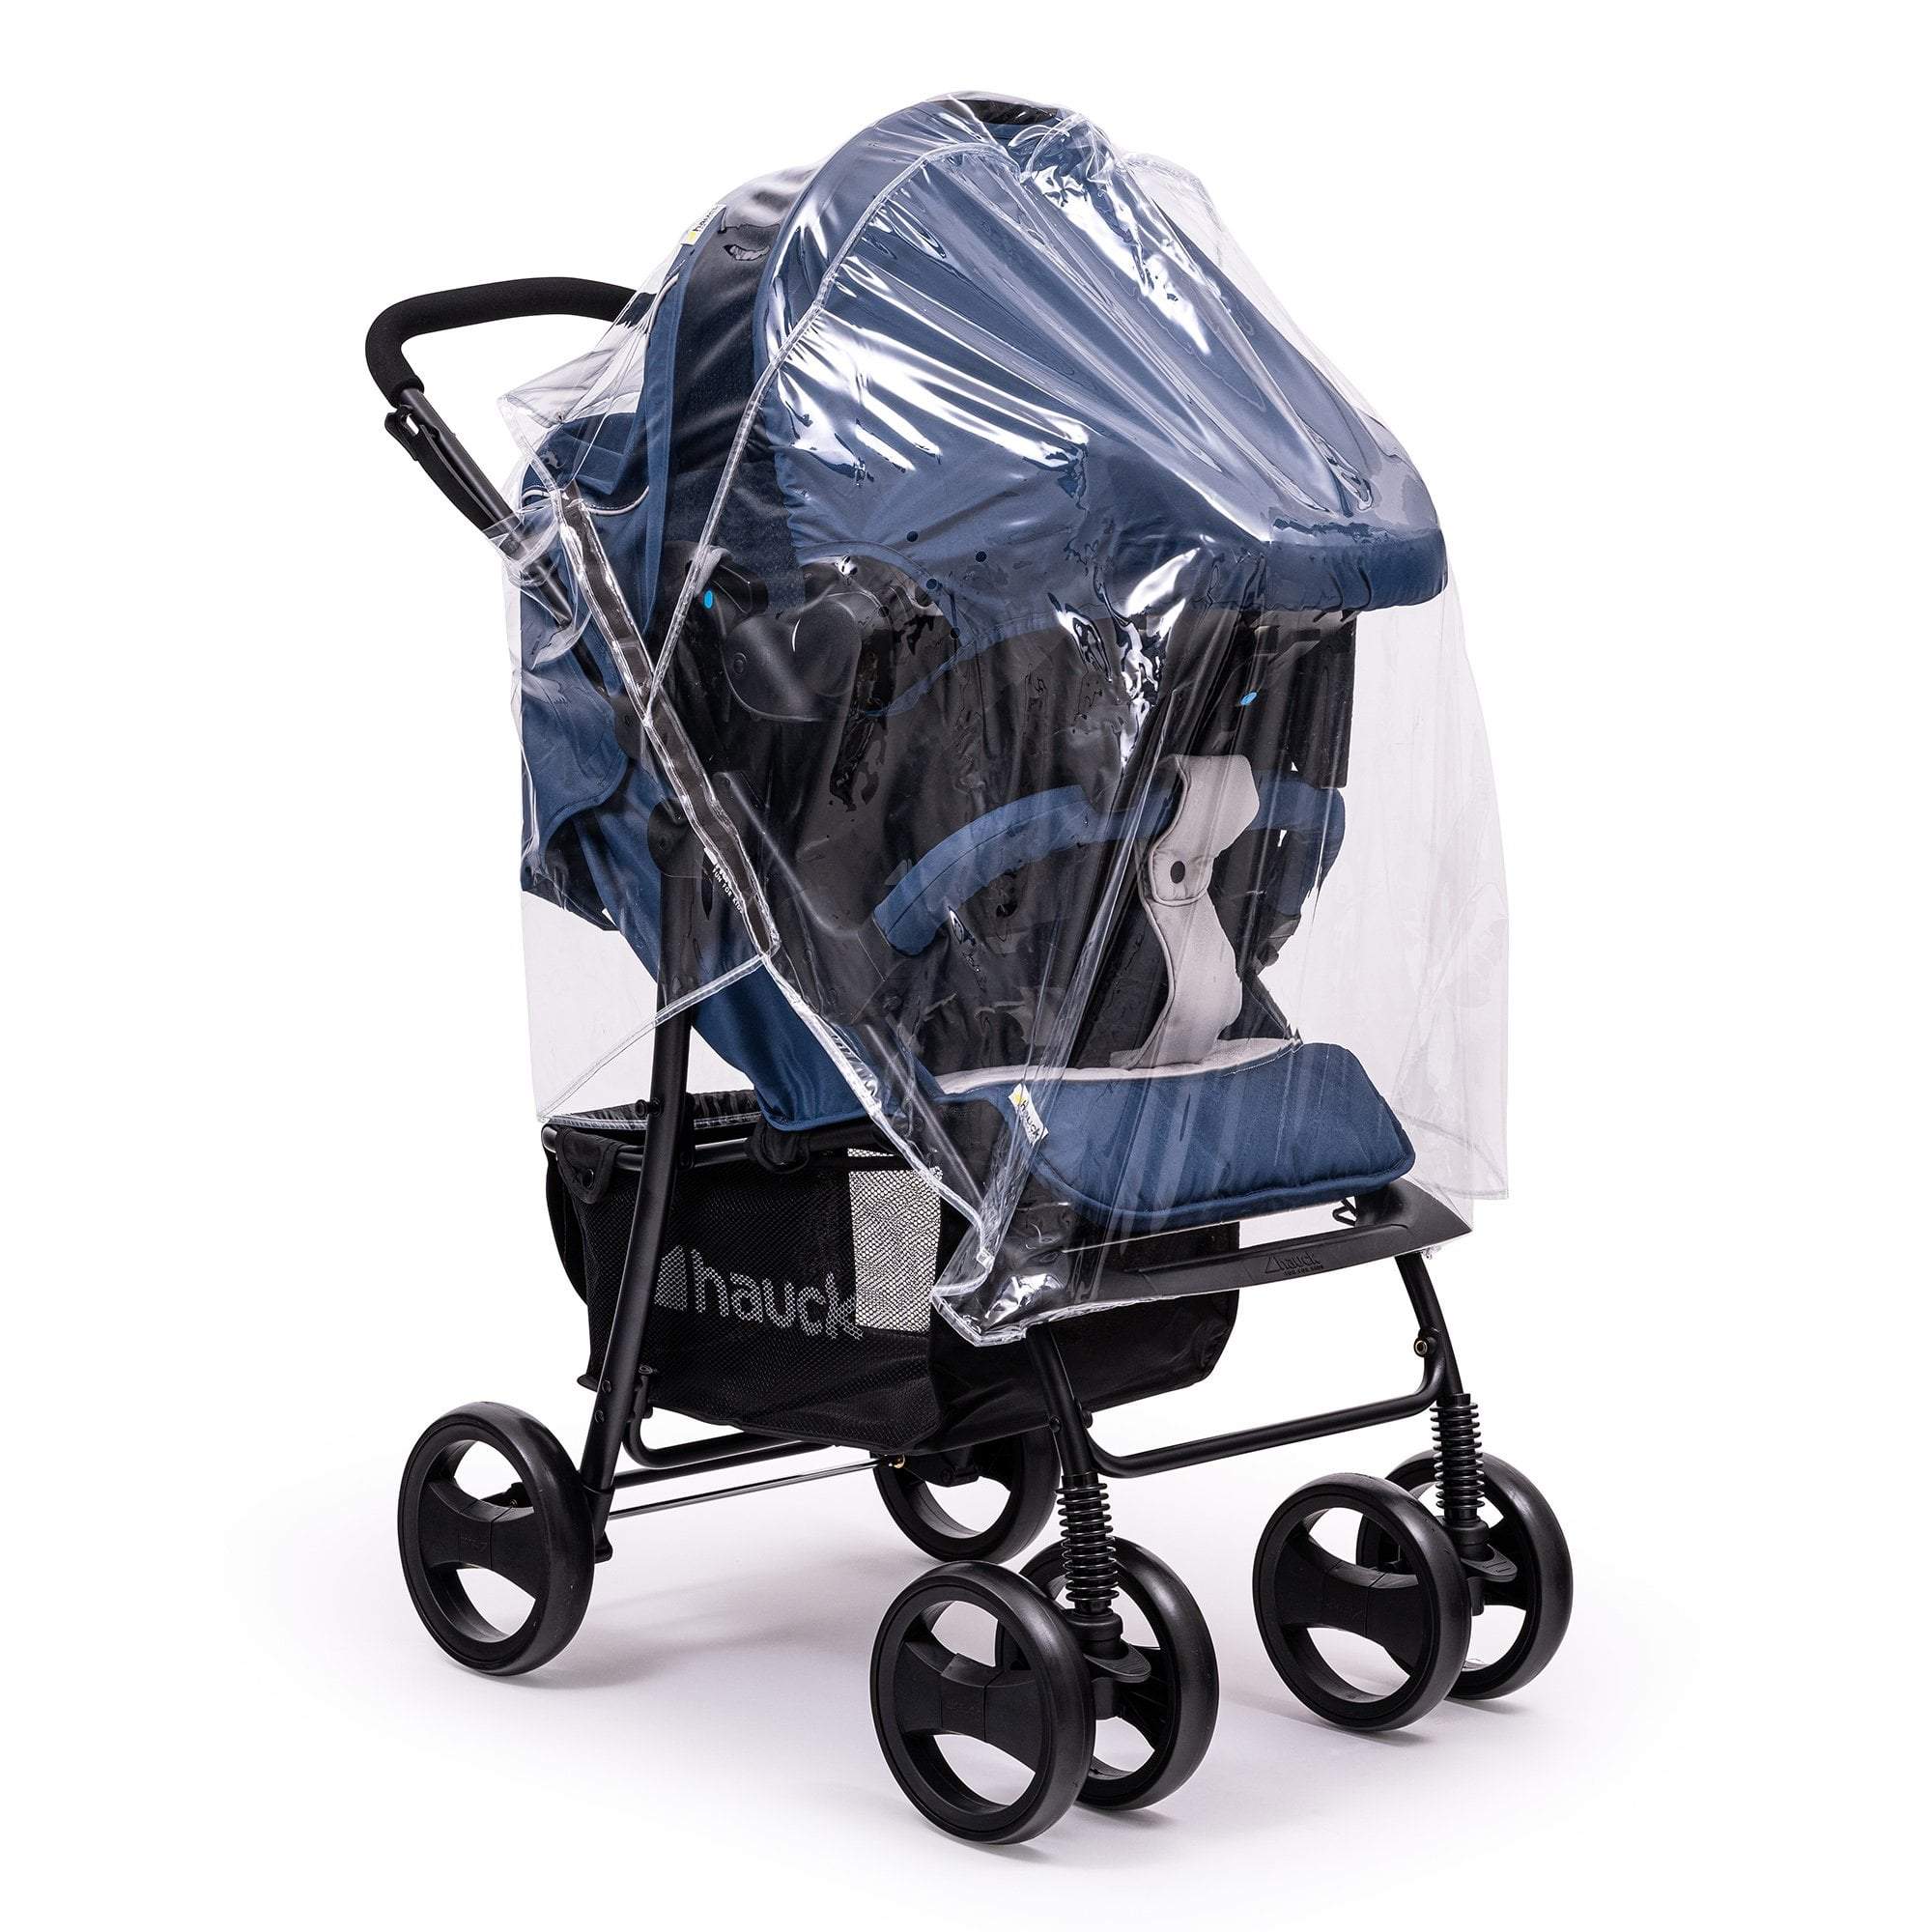 Travel System Raincover Compatible with Quinny - Fits All Models -  | For Your Little One